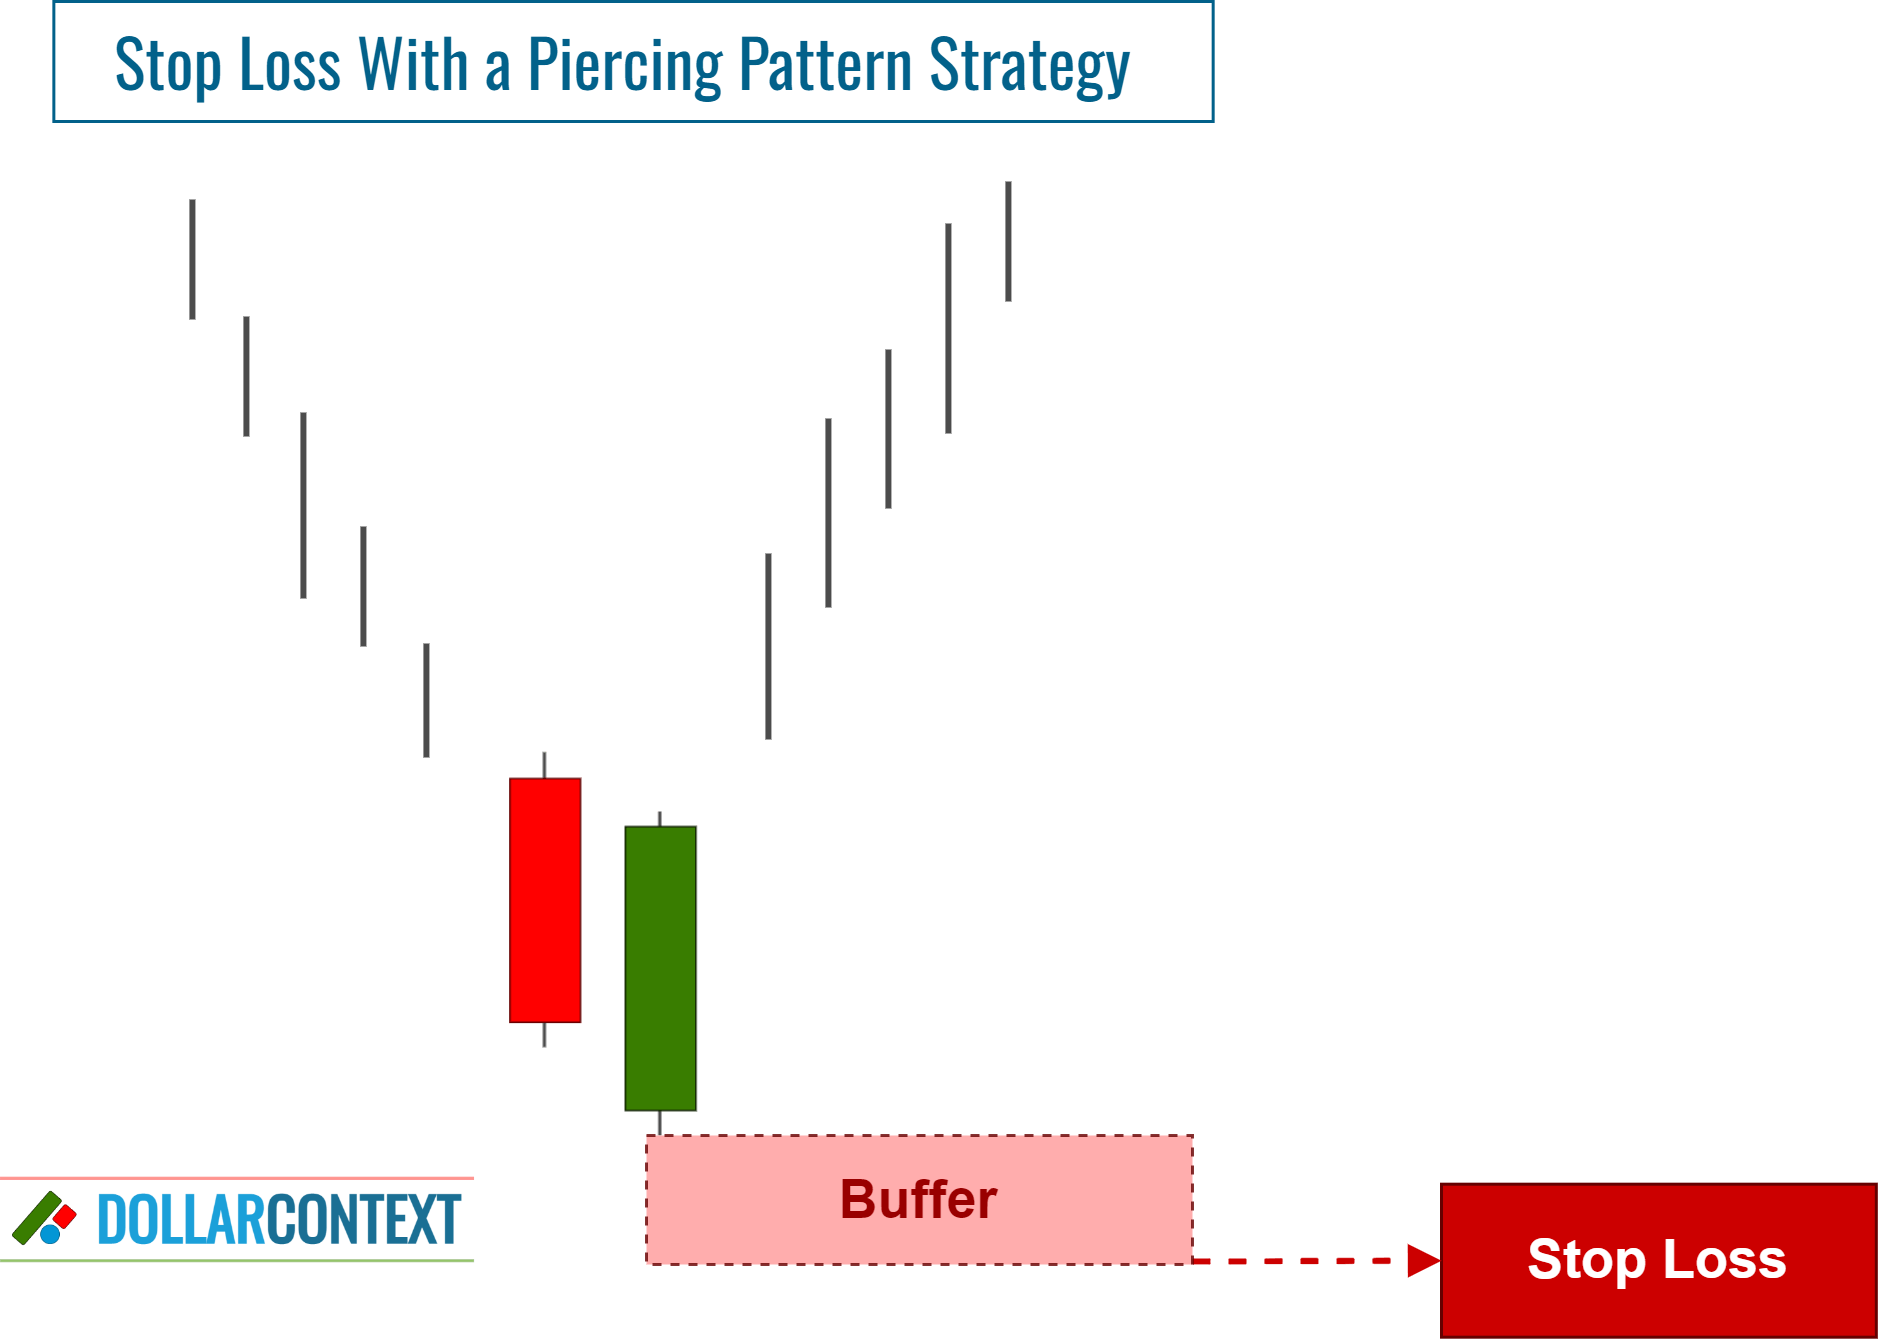 Adding a Buffer to the Stop-Loss of a Piercing Pattern